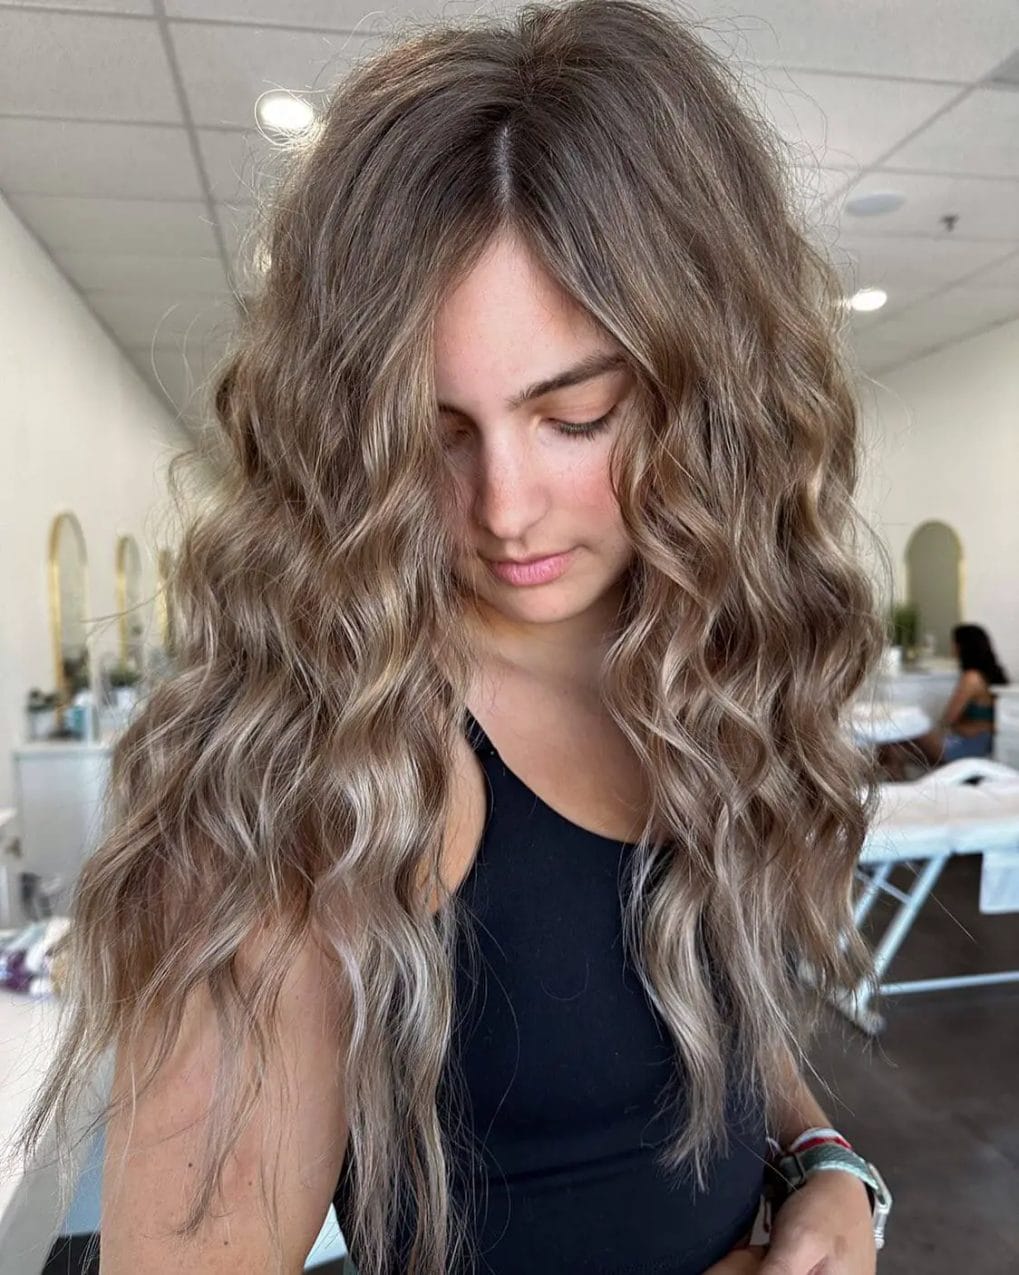 Tousled mane with beachy waves and sandy highlights on hair.